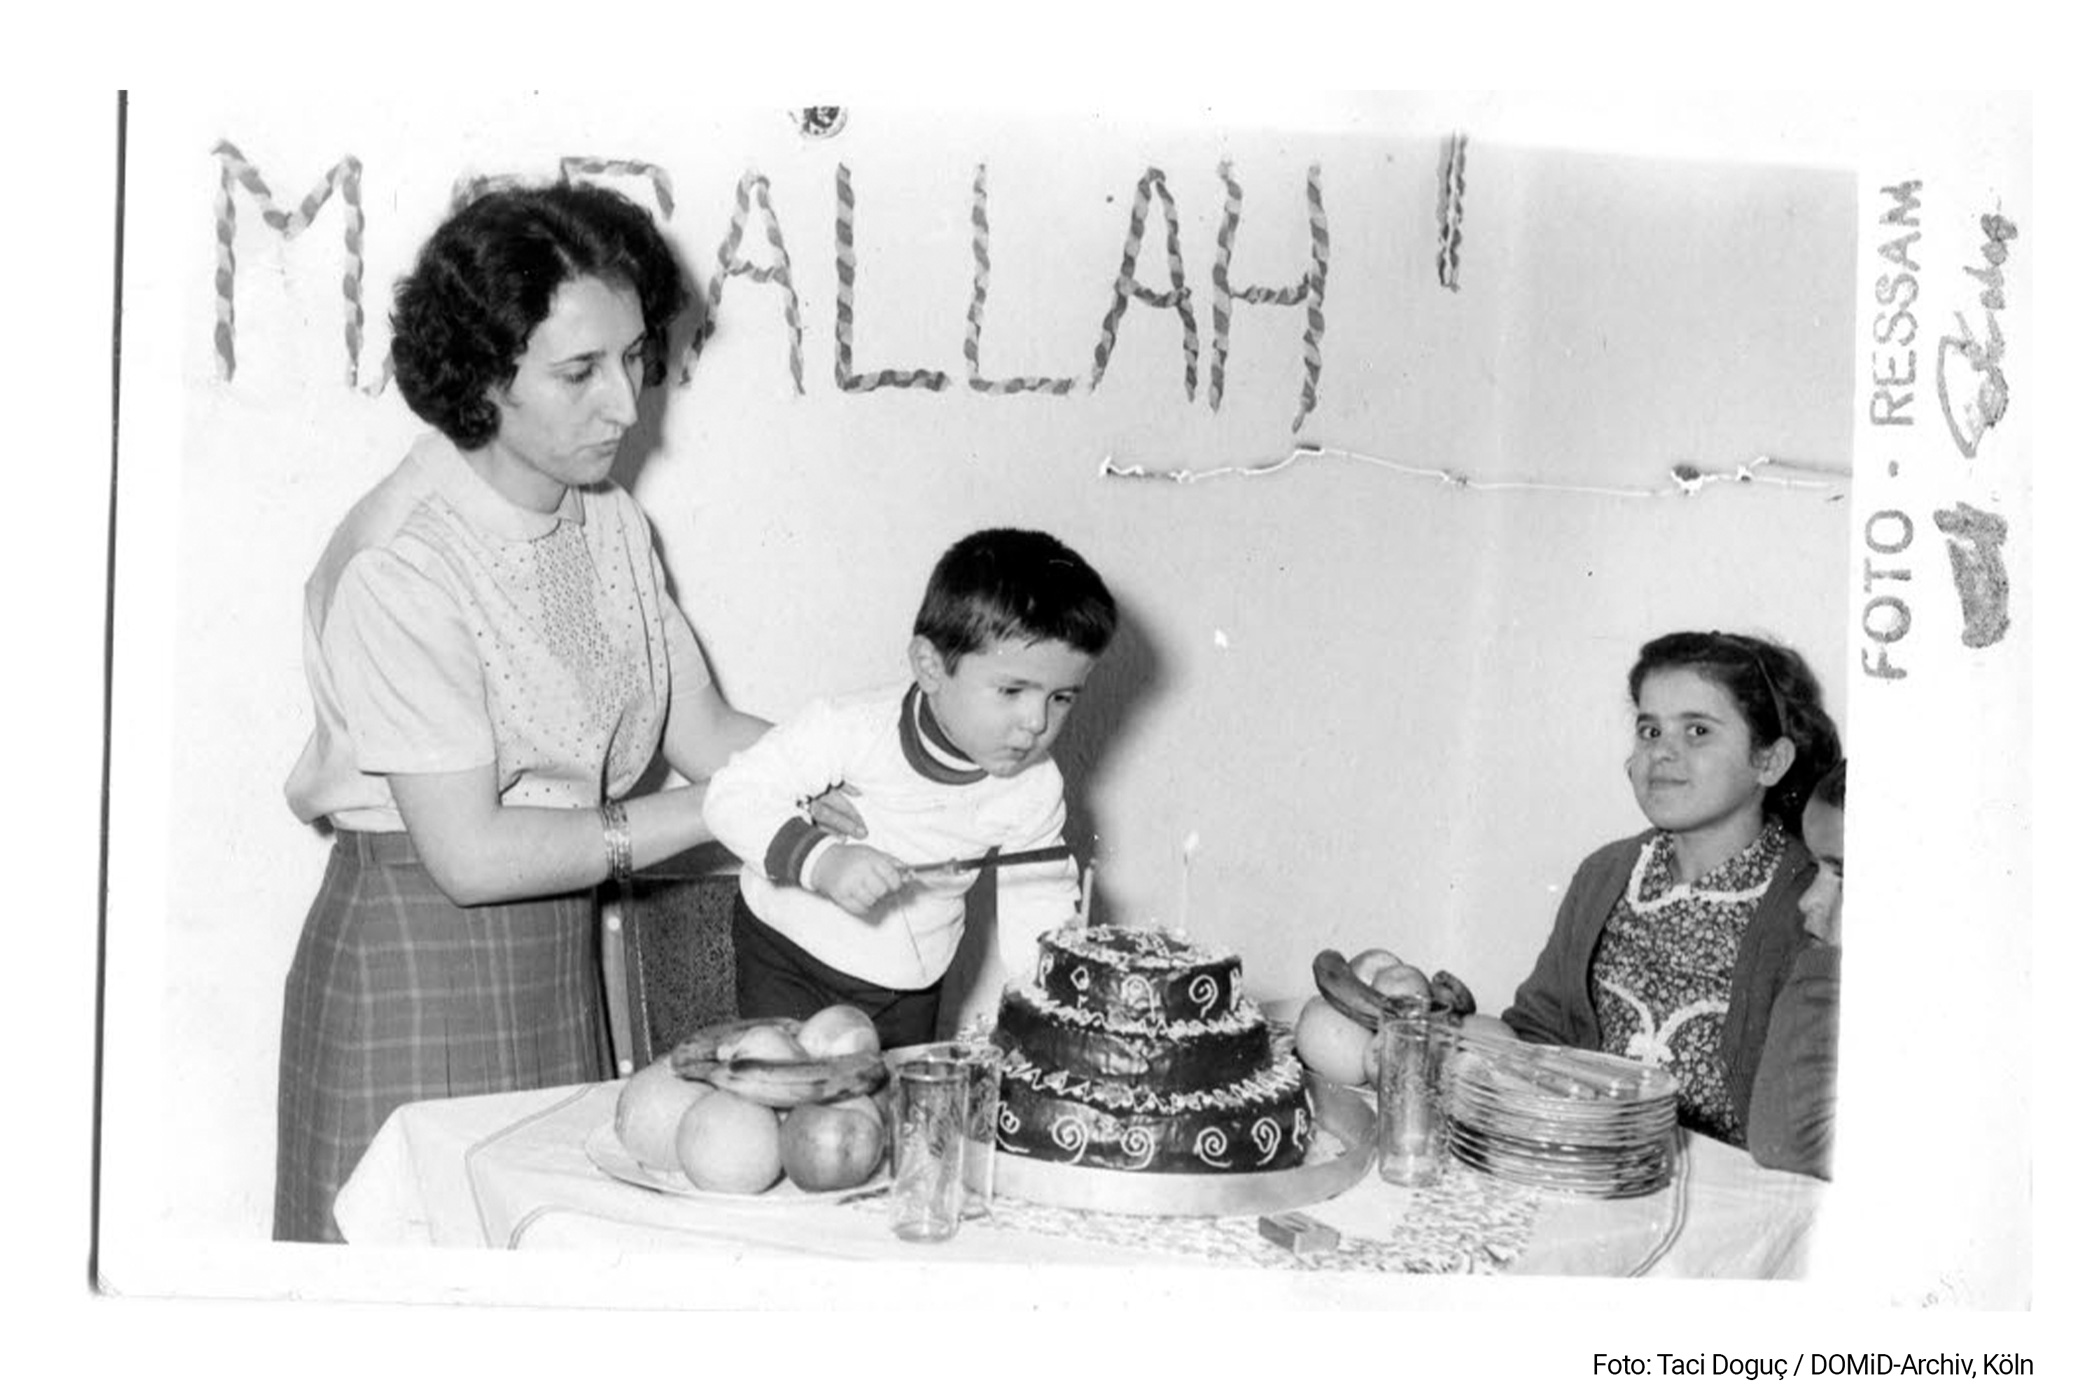 Shortly after the celebration of their son's second birthday in Turkey in 1970, the family joined the father, who had already been working in Germany for a year. Within the framework of family reunification, it became possible for very many foreign workers* to live together in Germany after a long period of separation.